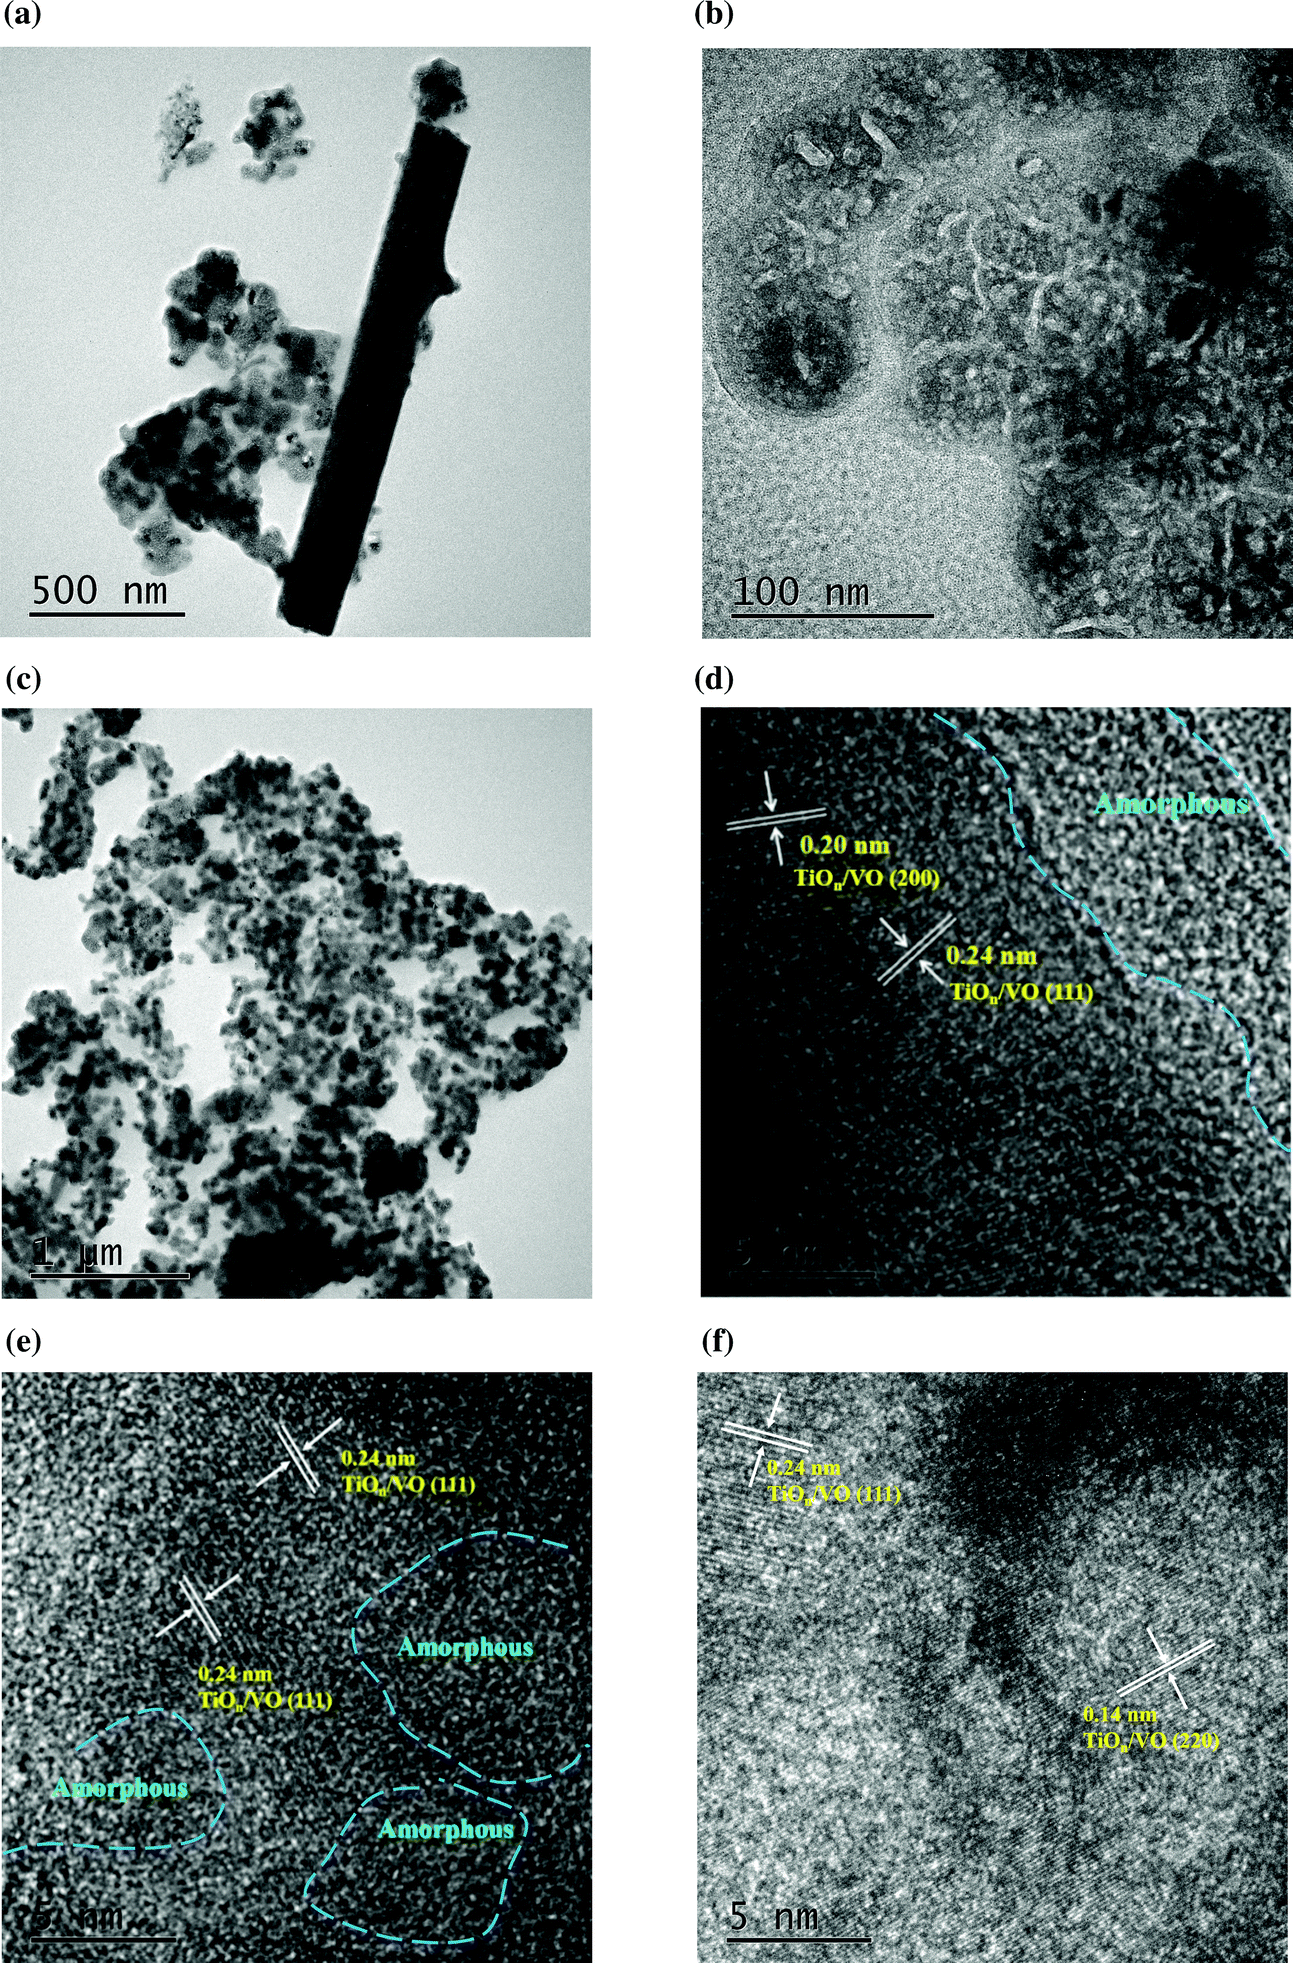 P Functionalized And O Deficient Tio N Vo M Nanoparticles Grown On Ni Foam As An Electrode For Supercapacitors Epitaxial Grown Heterojunction And Vi Dalton Transactions Rsc Publishing Doi 10 1039 D0dtd